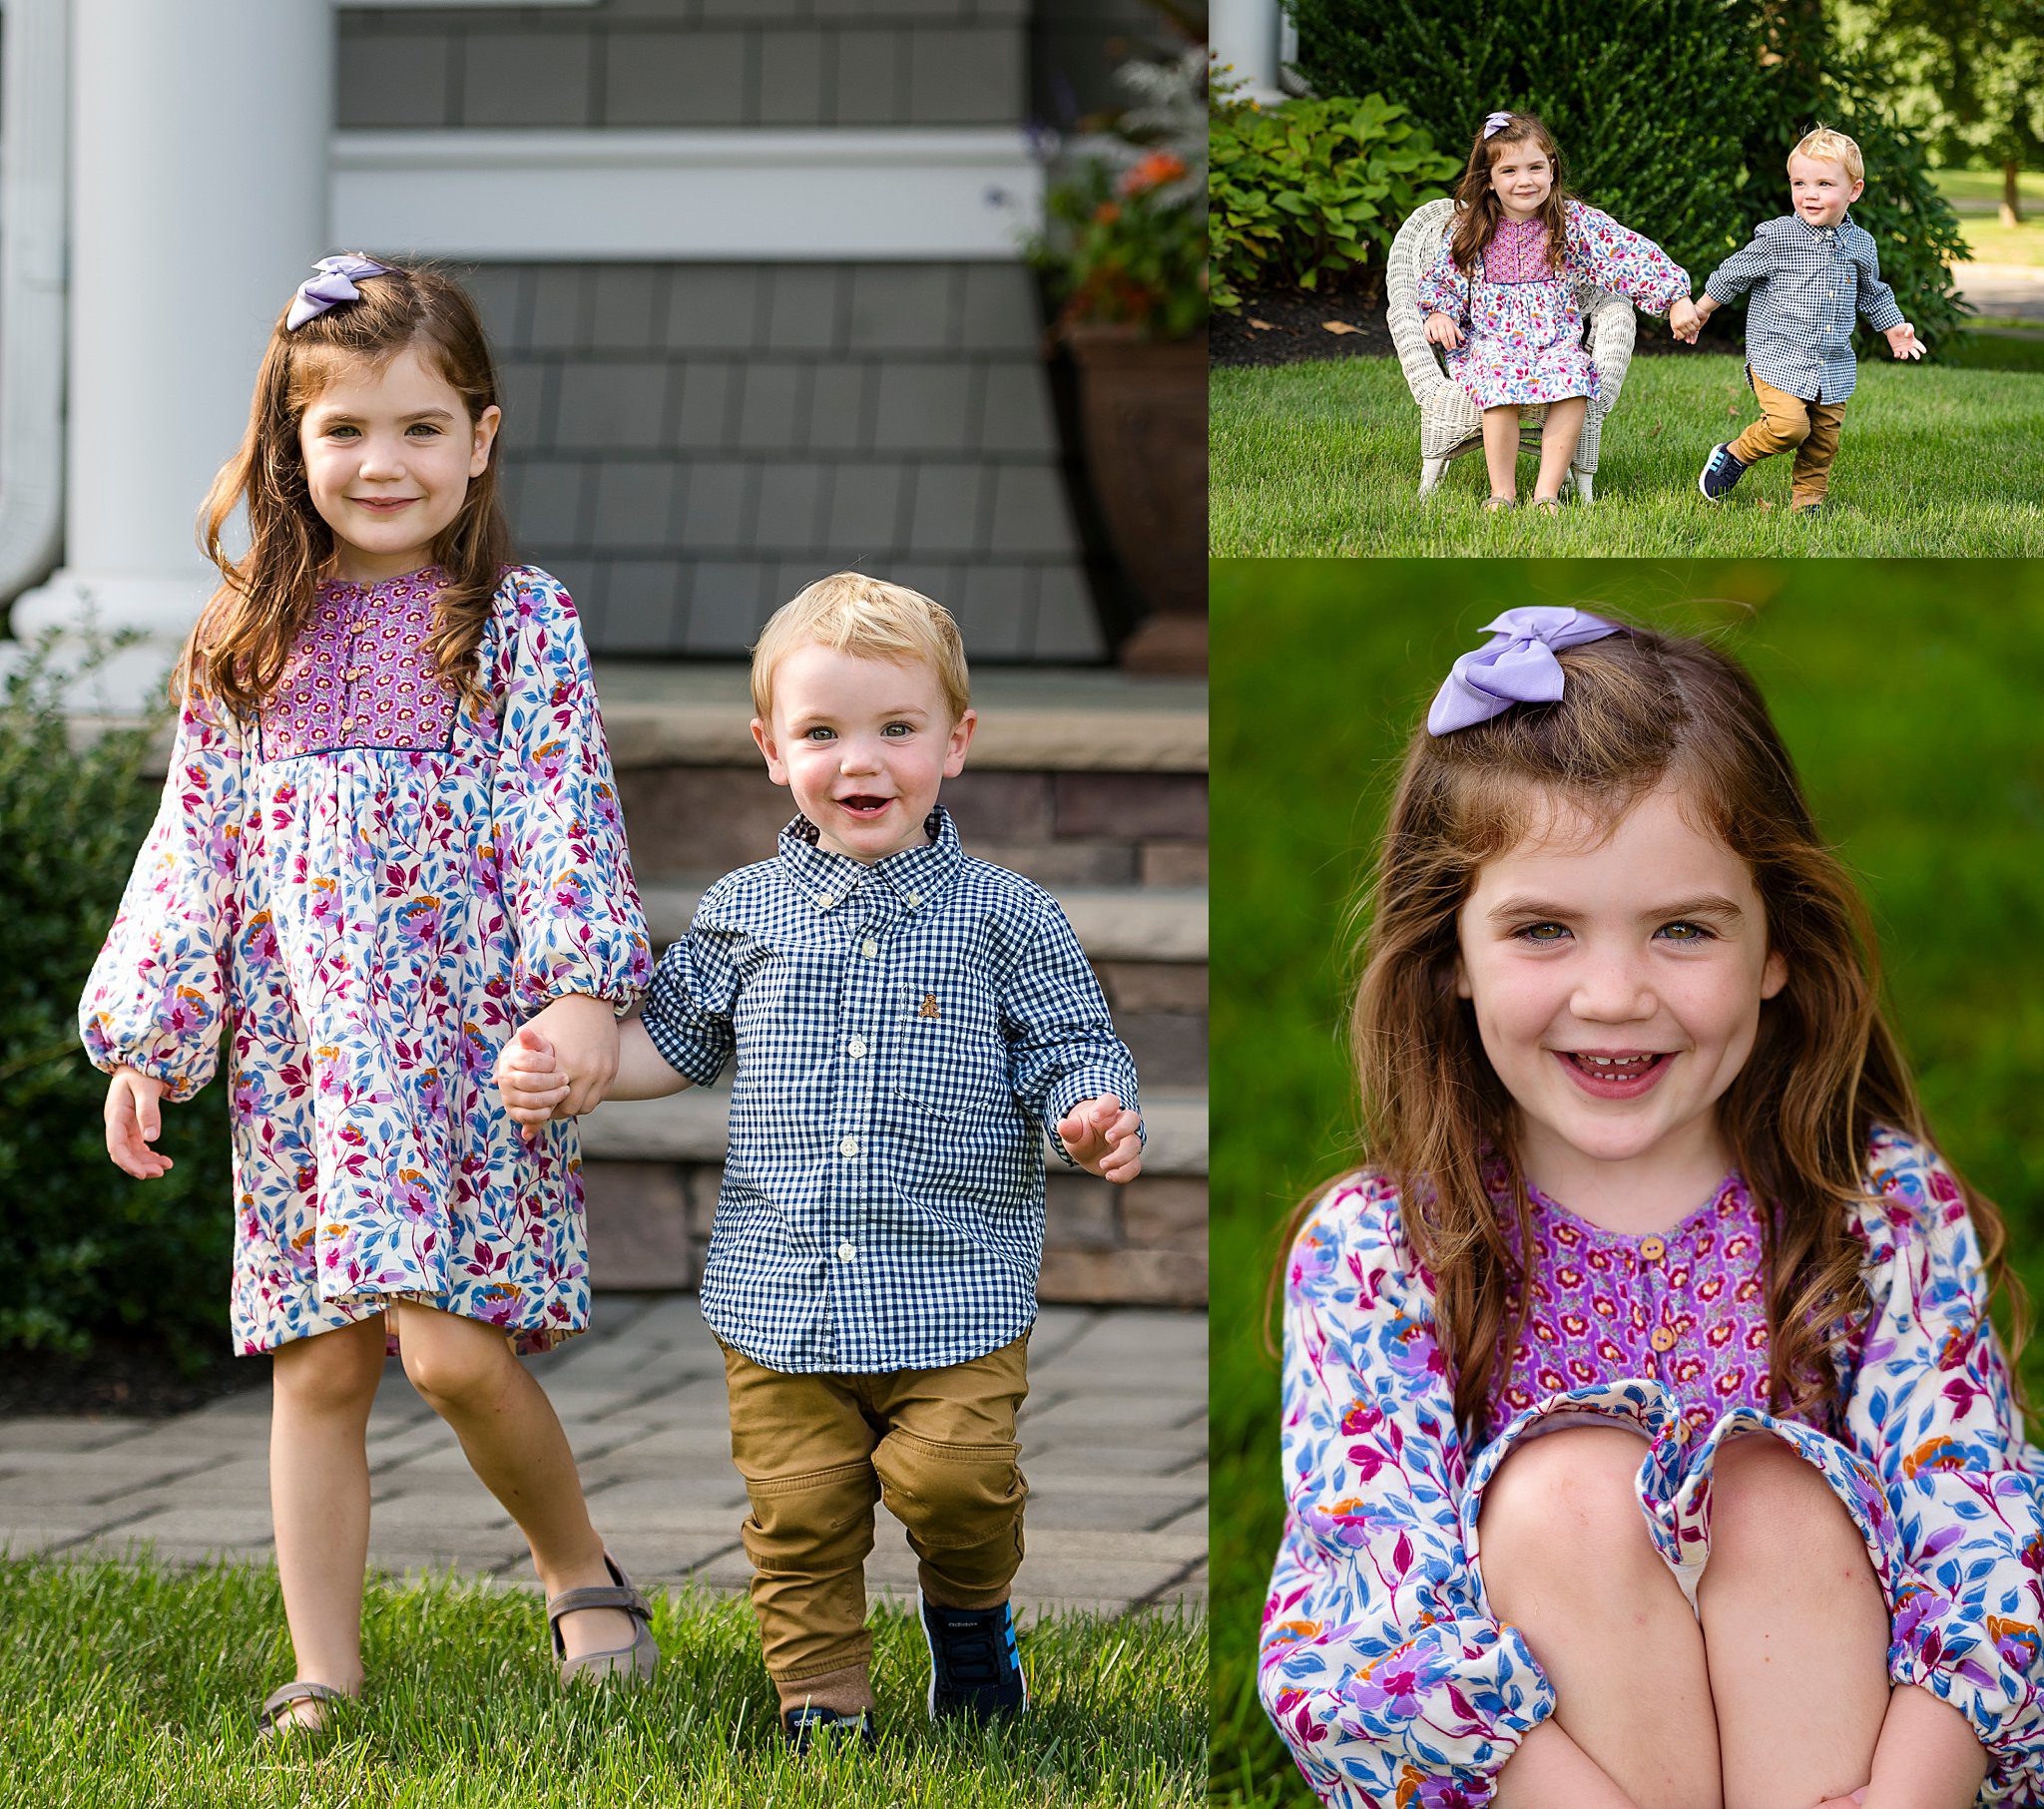 Rumson Brooklyn brother sister portraits in Fair Haven, New Jersey.